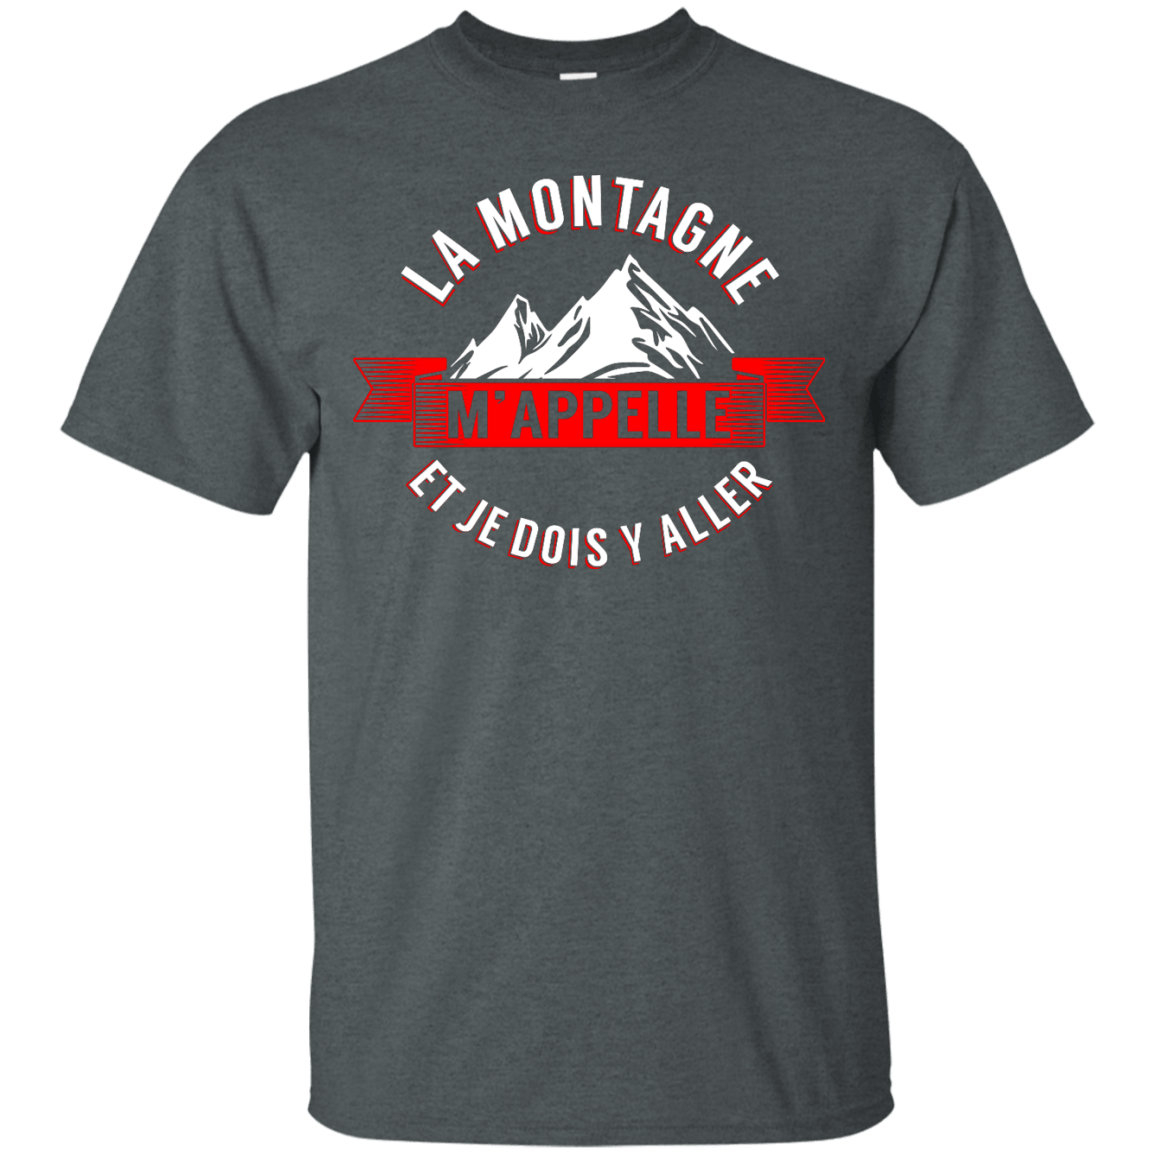 Mountains Are Calling - French Tees - Powderaddicts